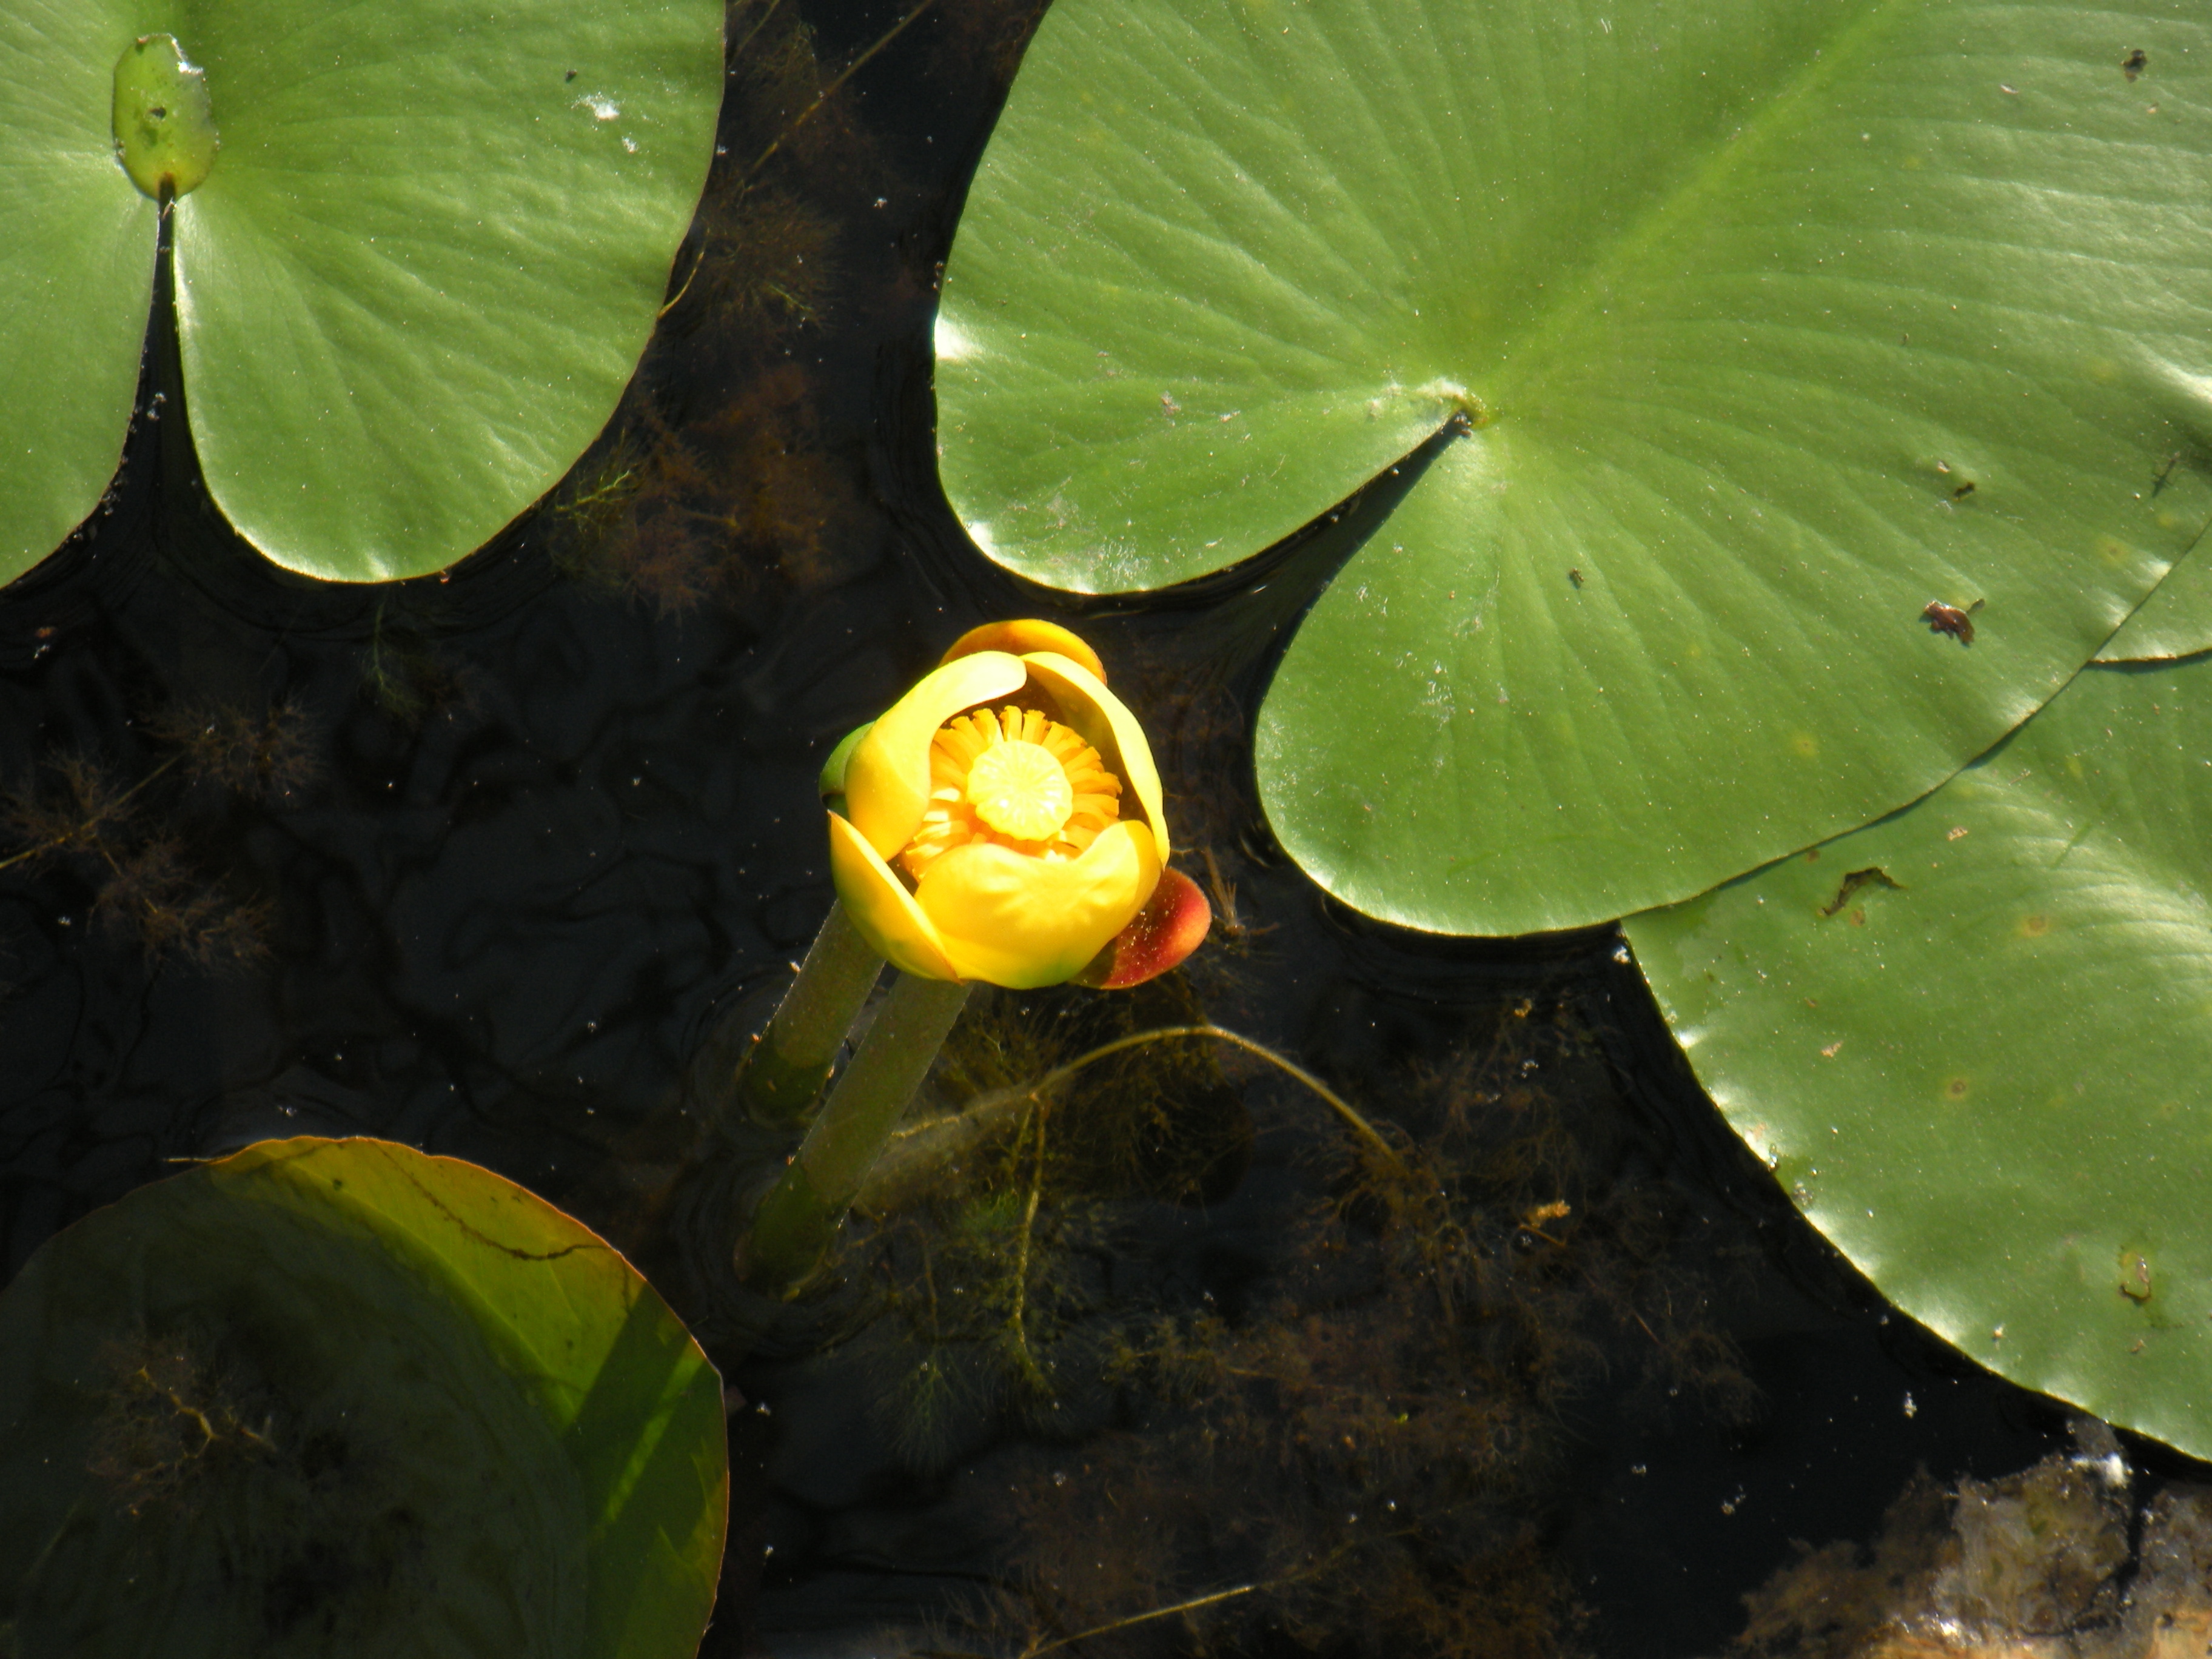 Lily pads and flowers photo